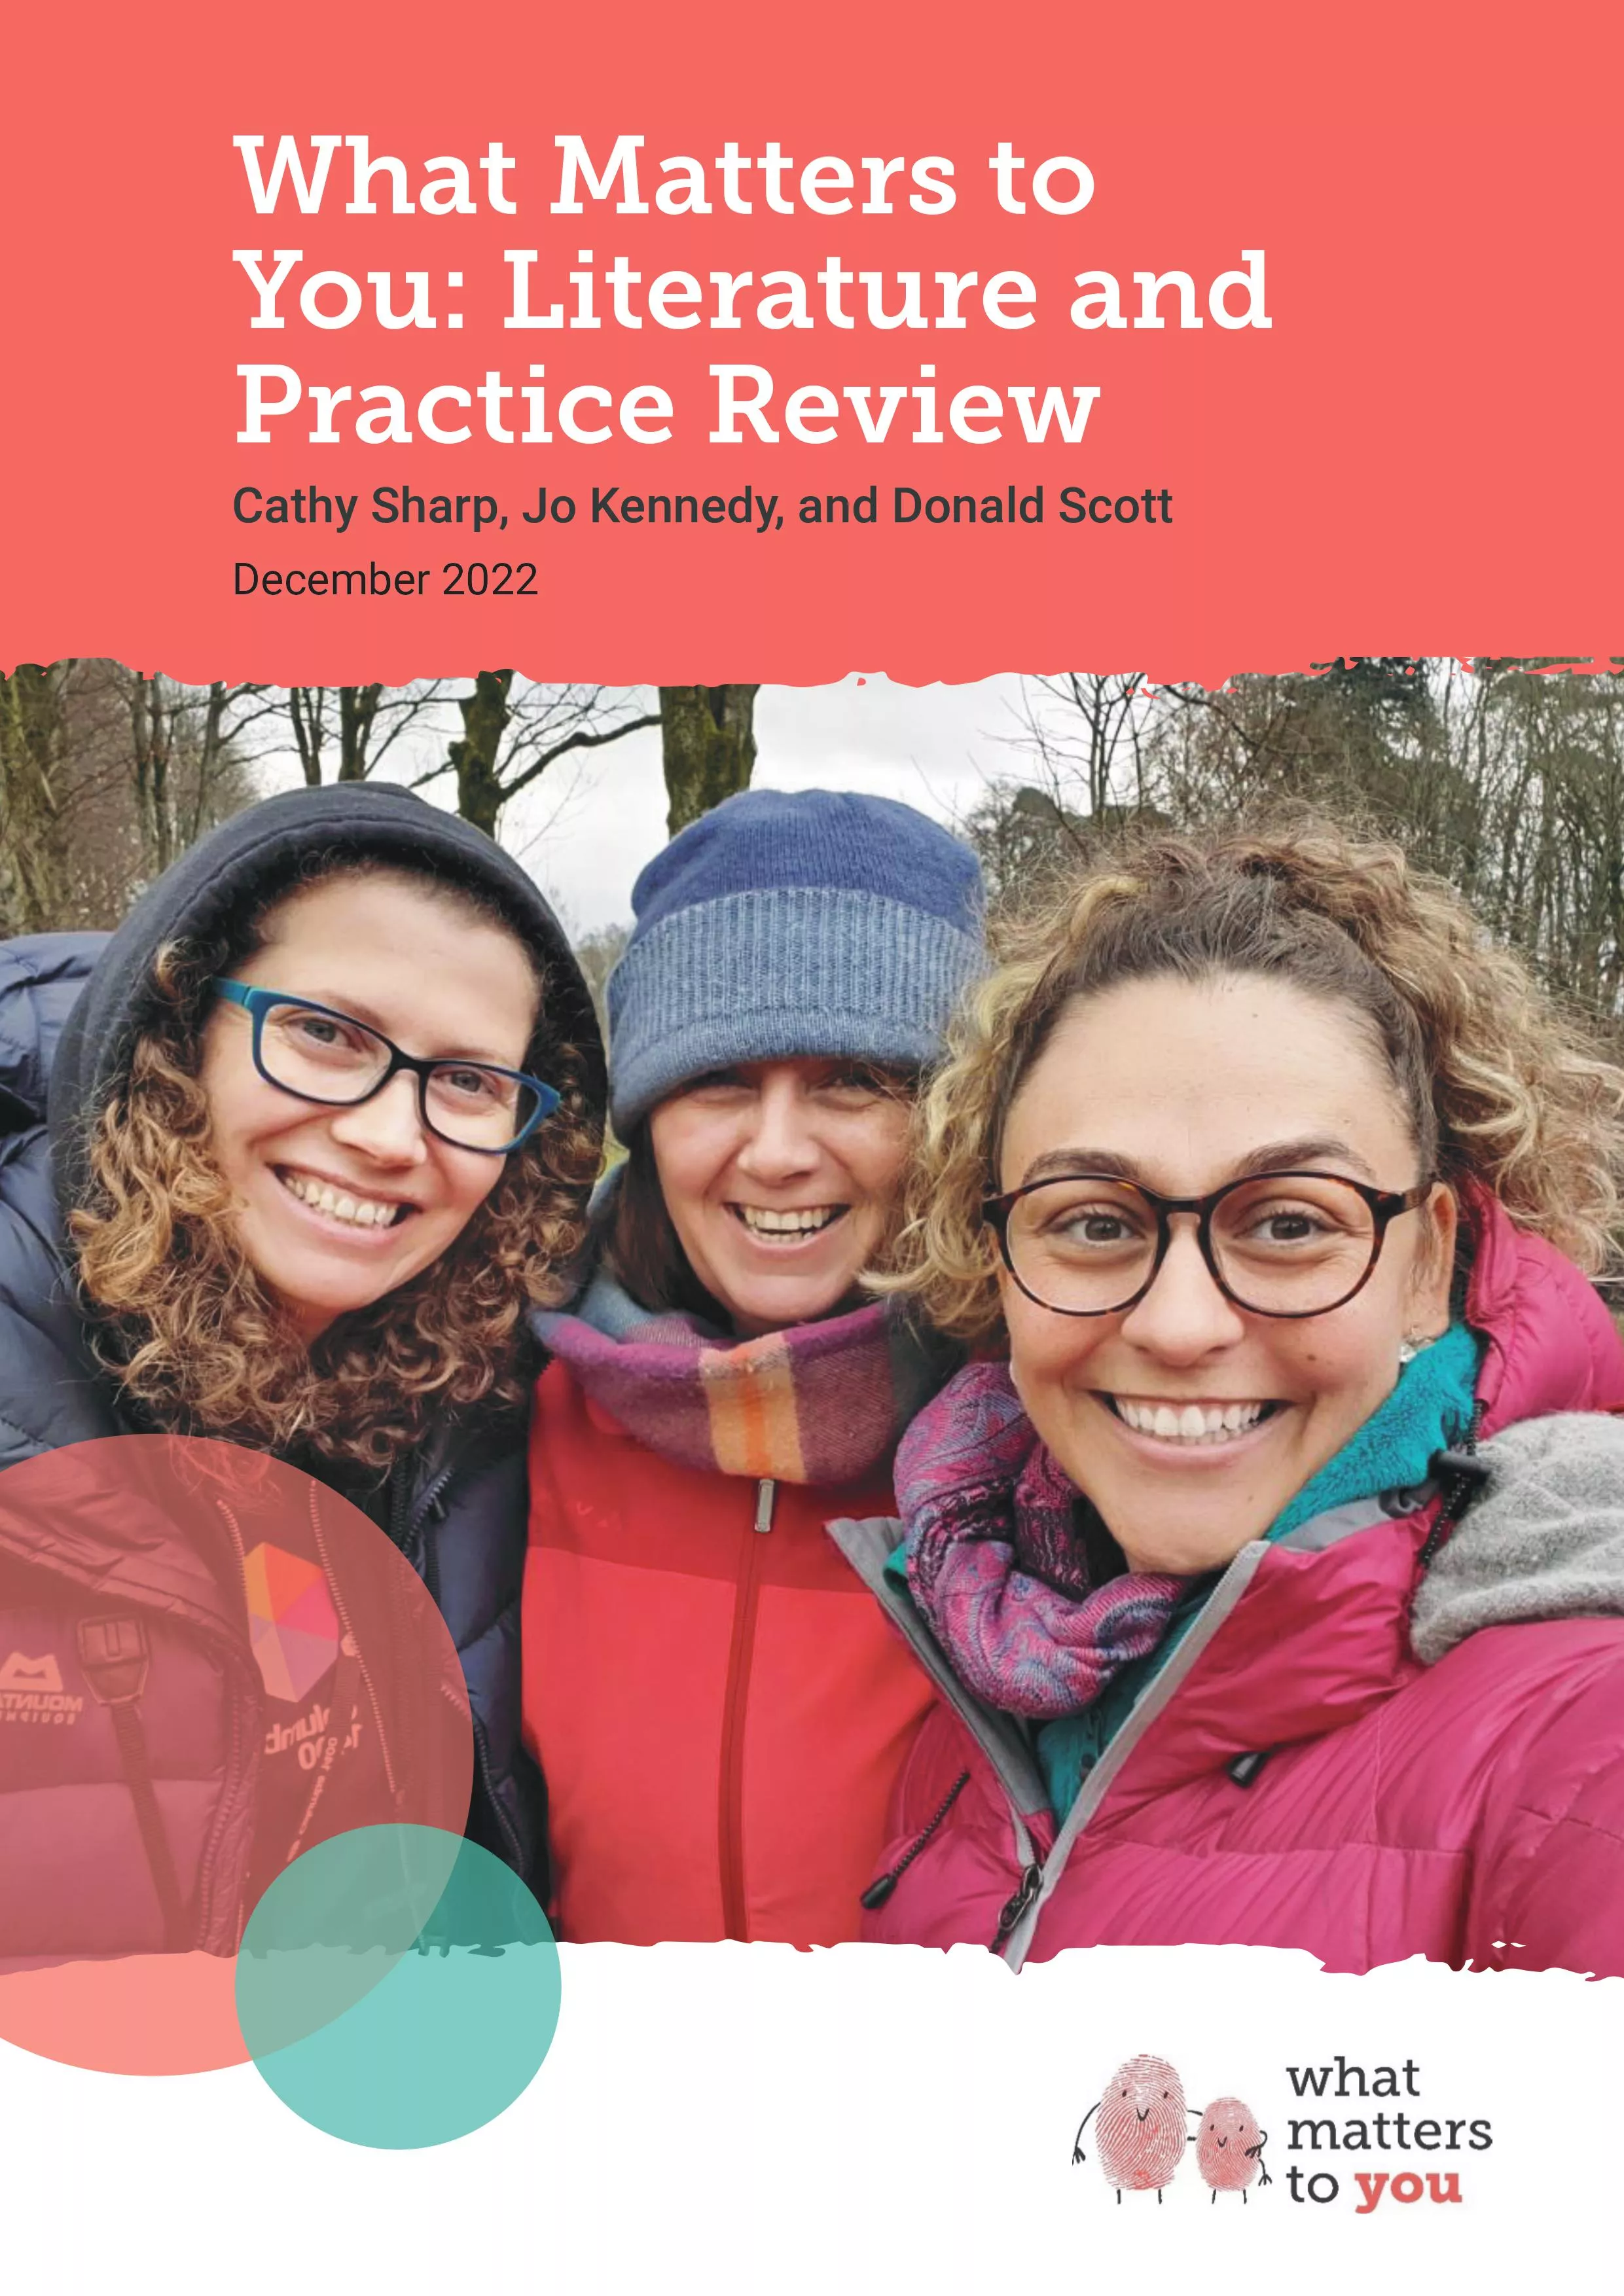 Literature and Practice Review